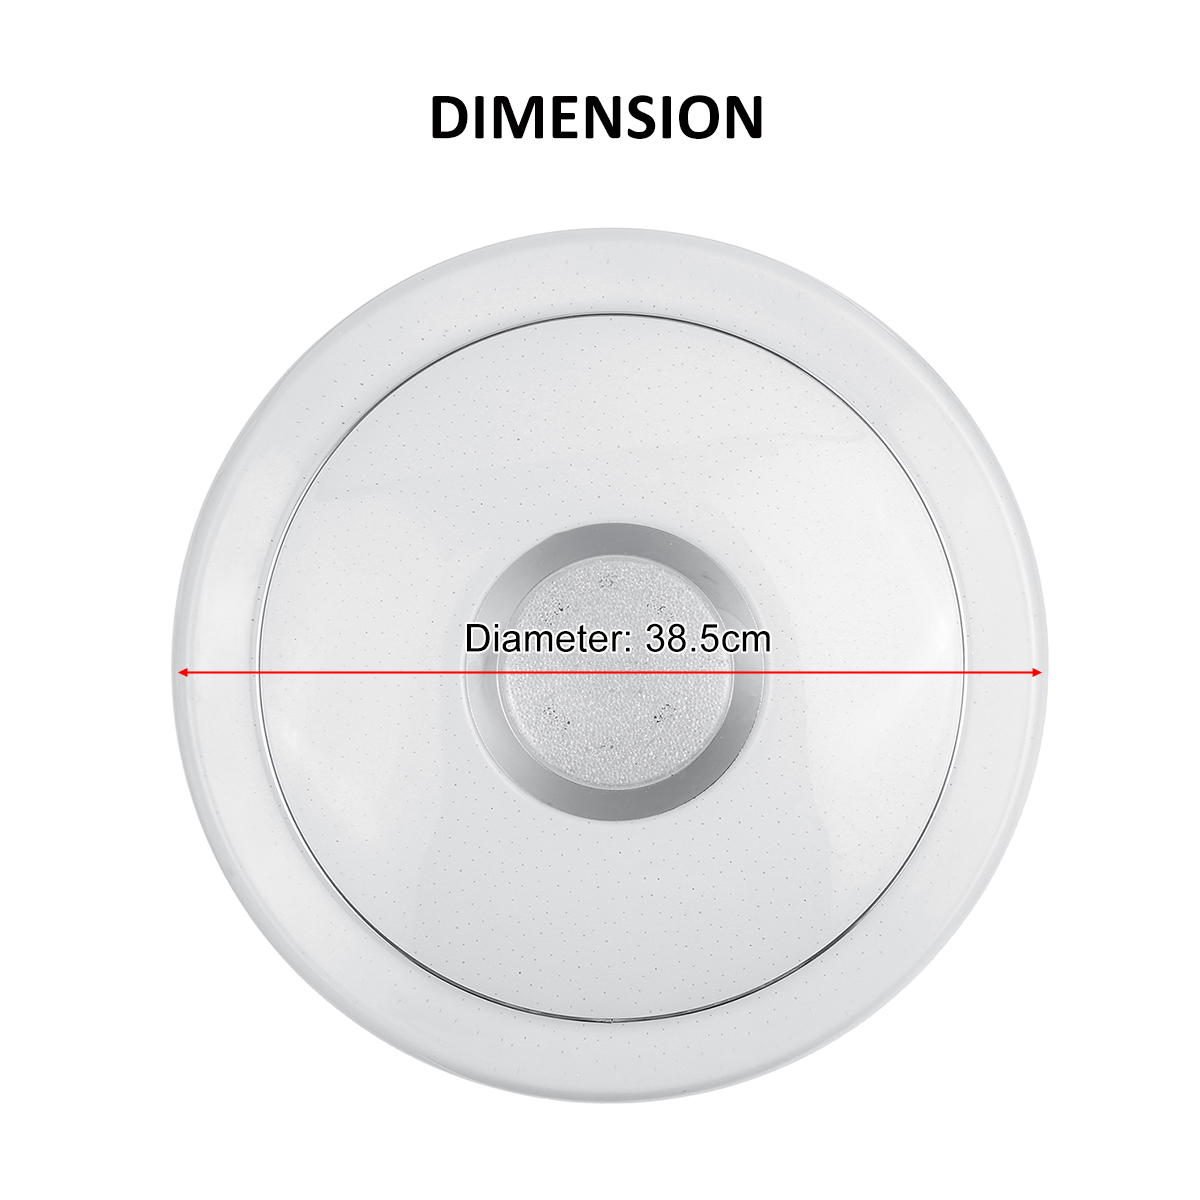 AC110-240V-bluetooth-WiFi-LED-Ceiling-Light-2835SMD-RGB-Music-Speaker-Dimmable-Lamp--Remote-Control-1771607-7